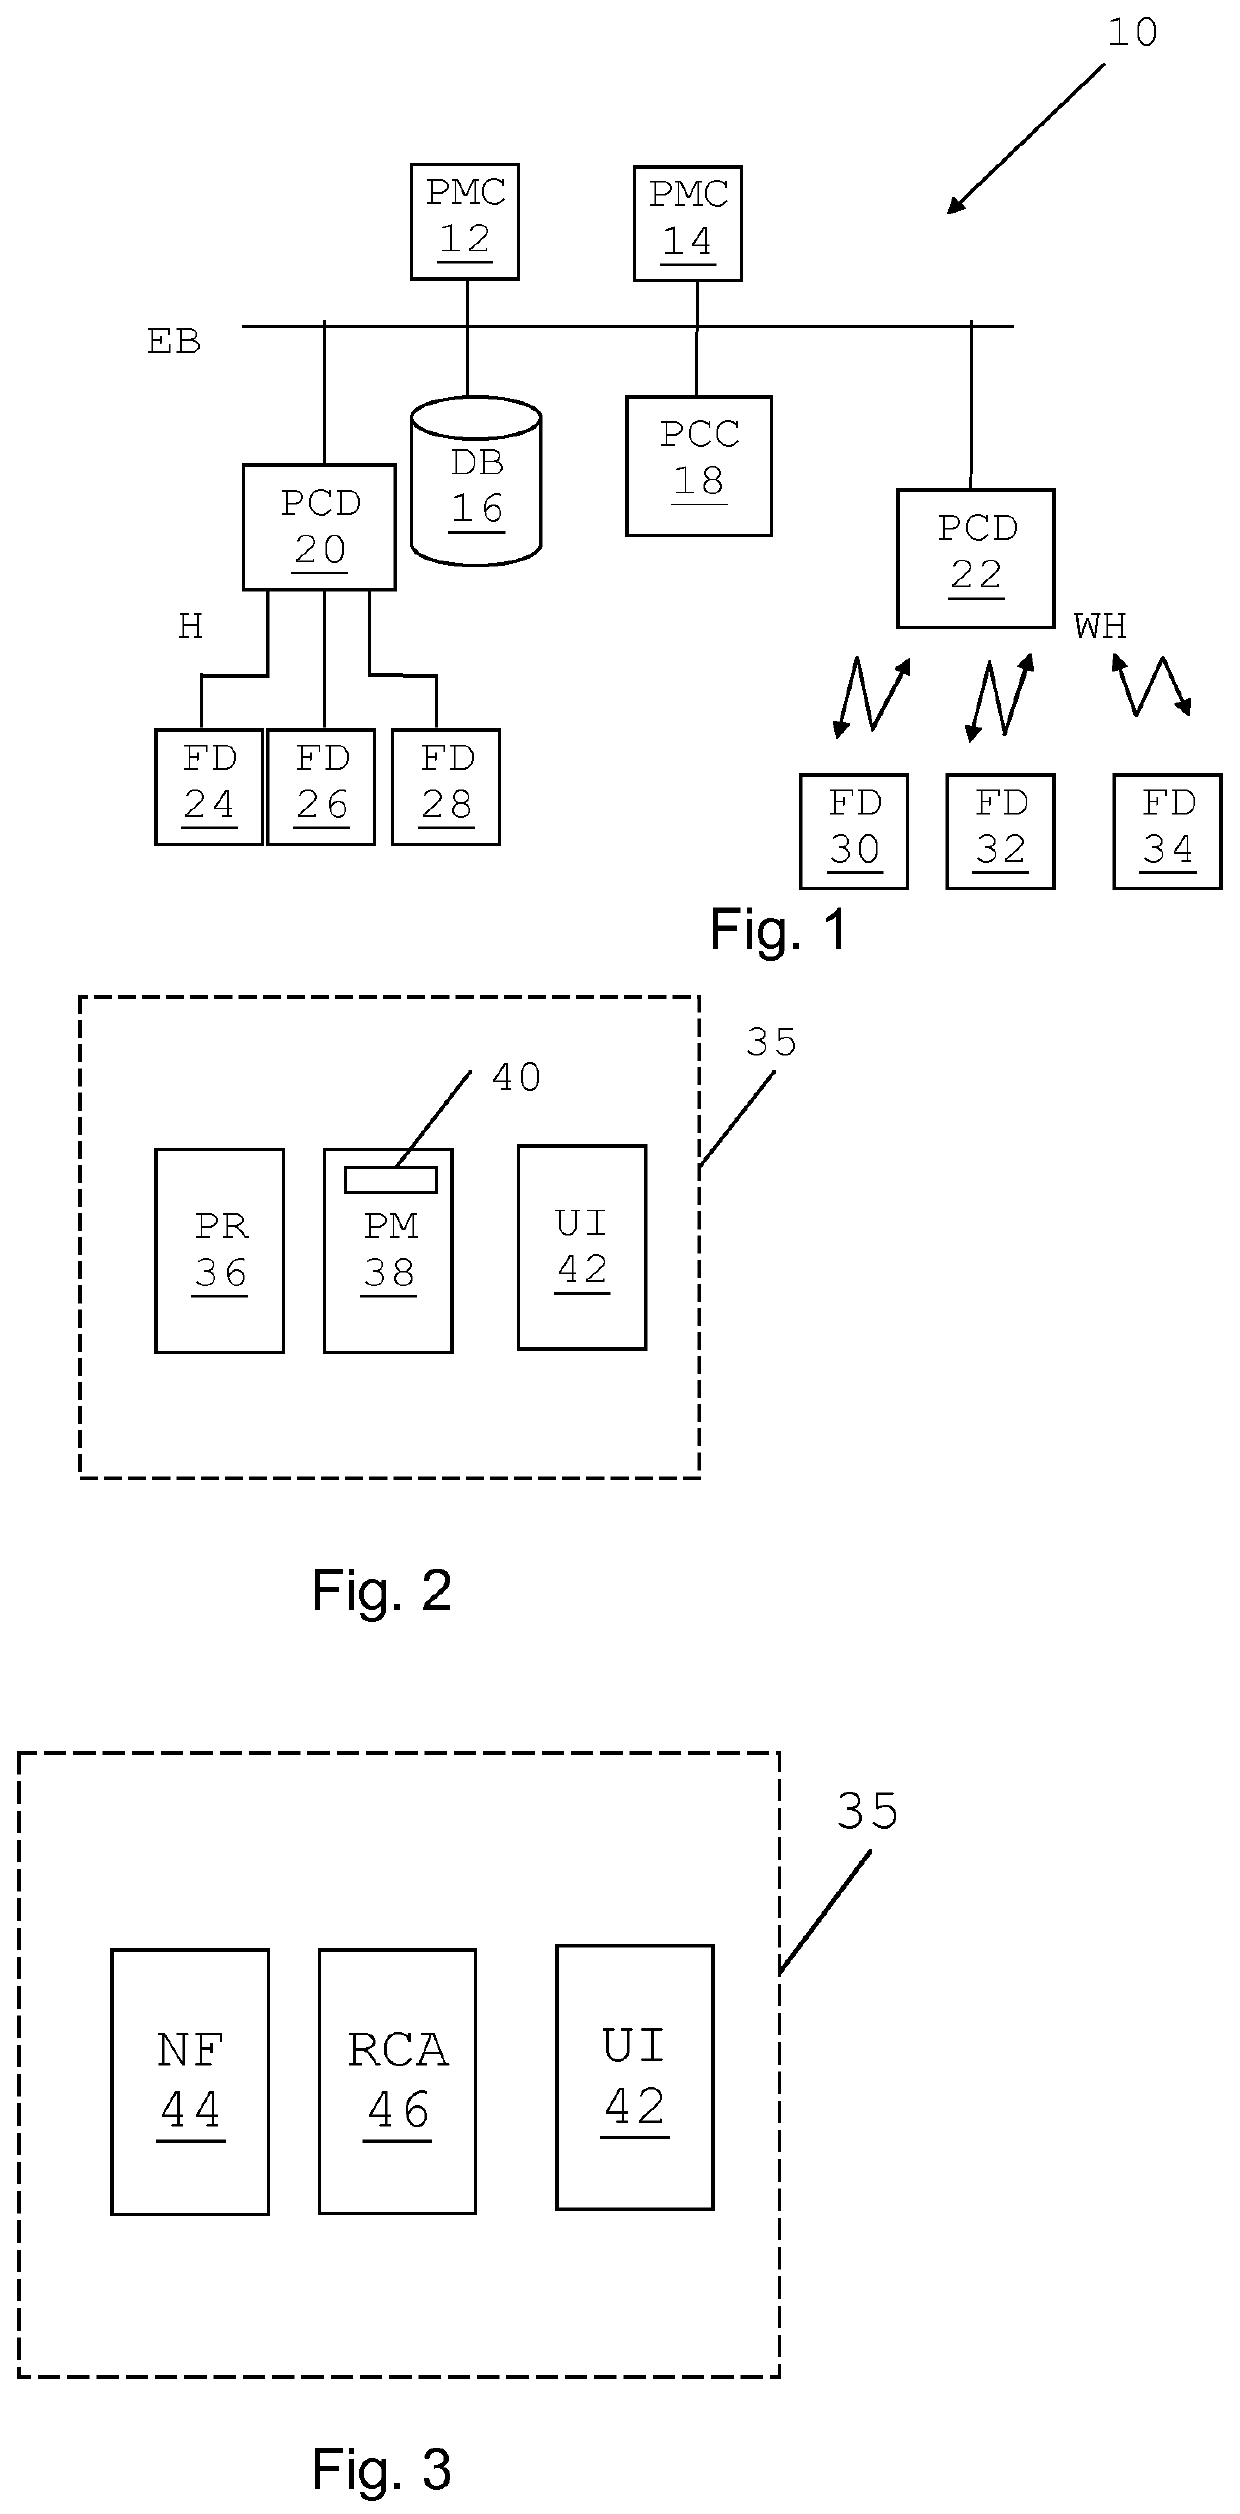 Root cause analysis of failure to meet communication requirements in a process control system